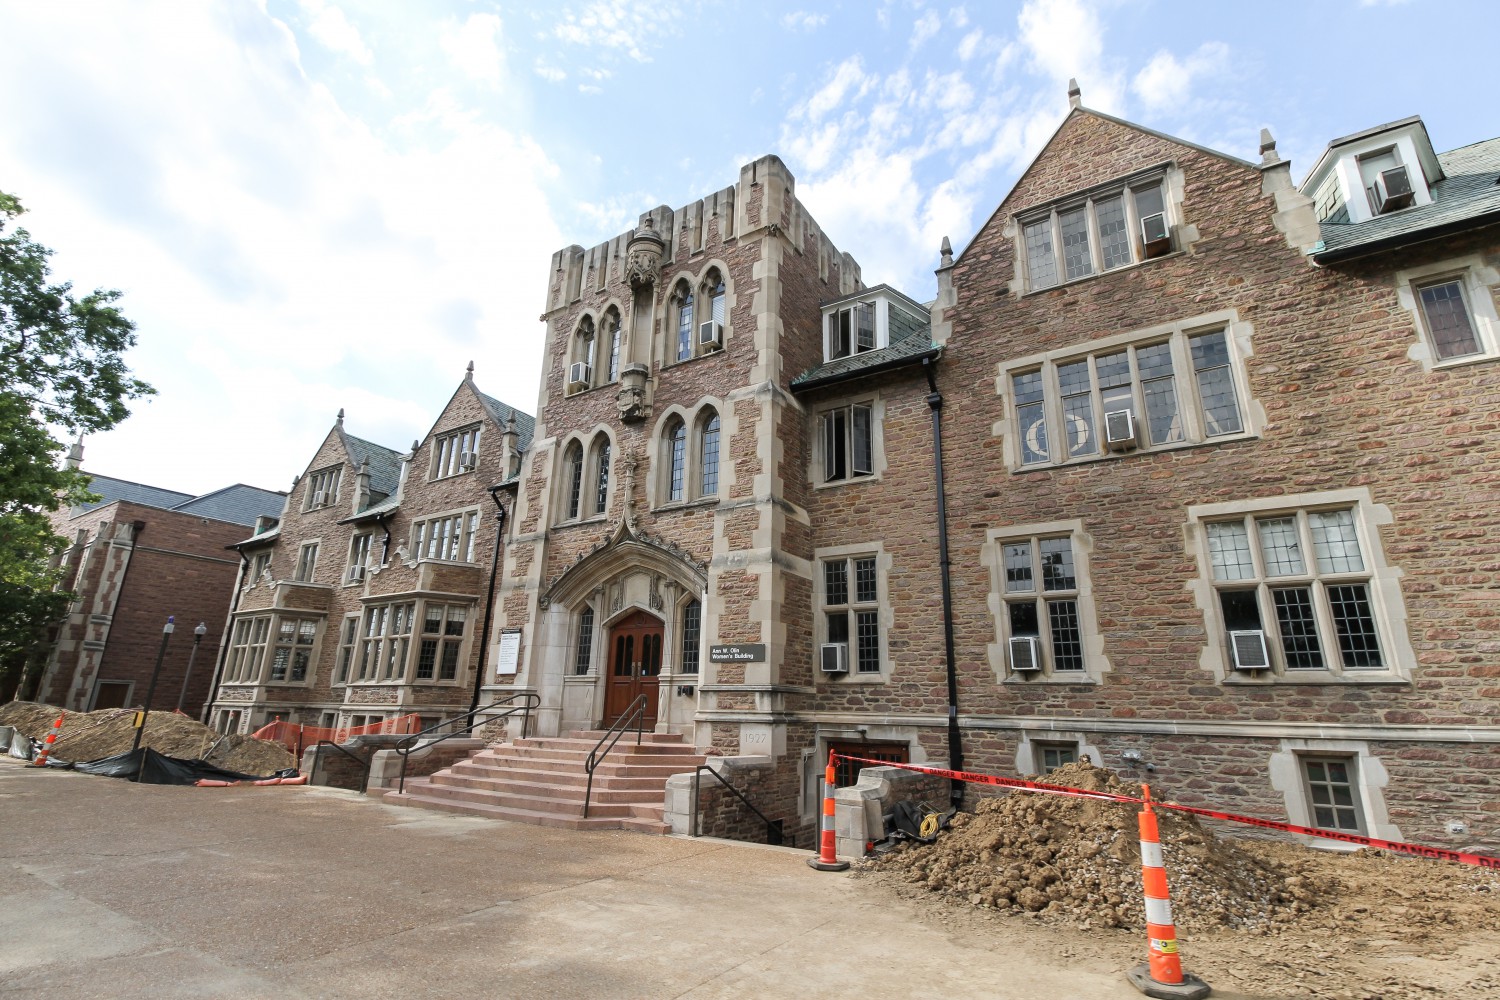 The Women’s Building contains entire floors that cannot be accessed by individuals with physical disabilities. Despite ADA compliant plans put into place in the development of the east end of campus, many buildings on the west side remain inaccessible.